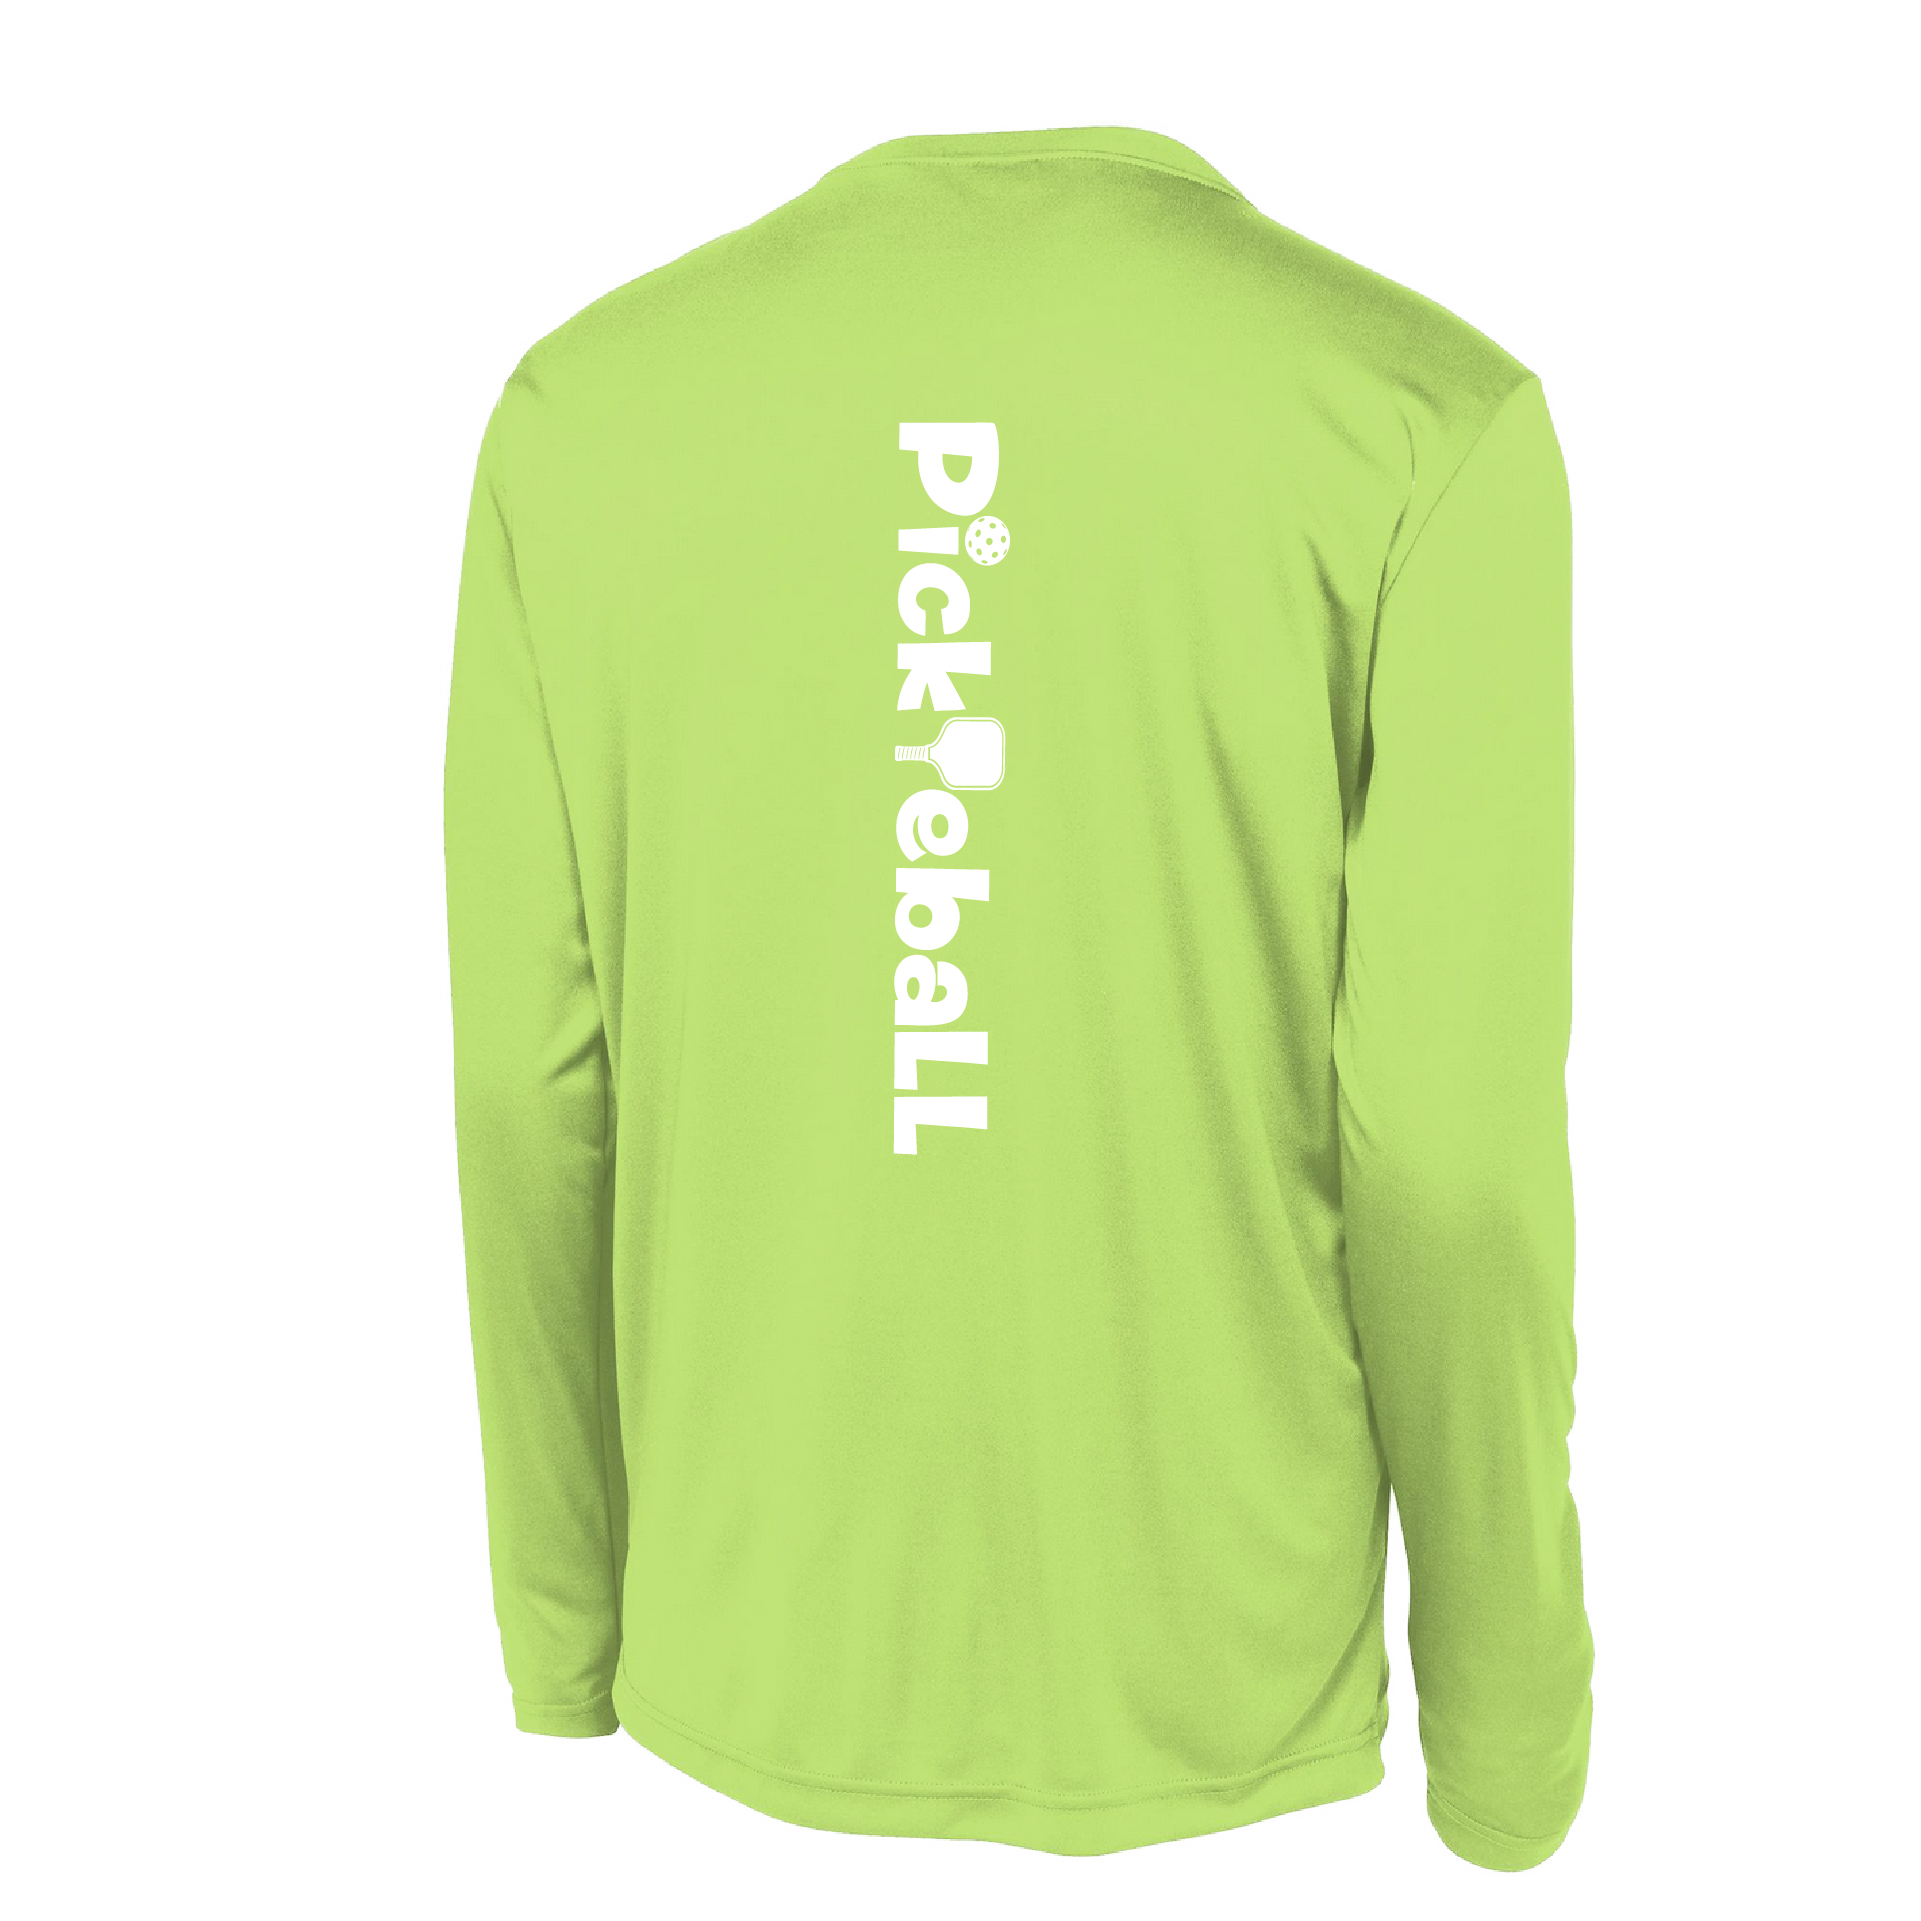 Pickleball Design: Pickleball Horizontal Customizable Location  Men's Style: Long Sleeve  Shirts are lightweight, roomy and highly breathable. These moisture-wicking shirts are designed for athletic performance. They feature PosiCharge technology to lock in color and prevent logos from fading. Removable tag and set-in sleeves for comfort. 